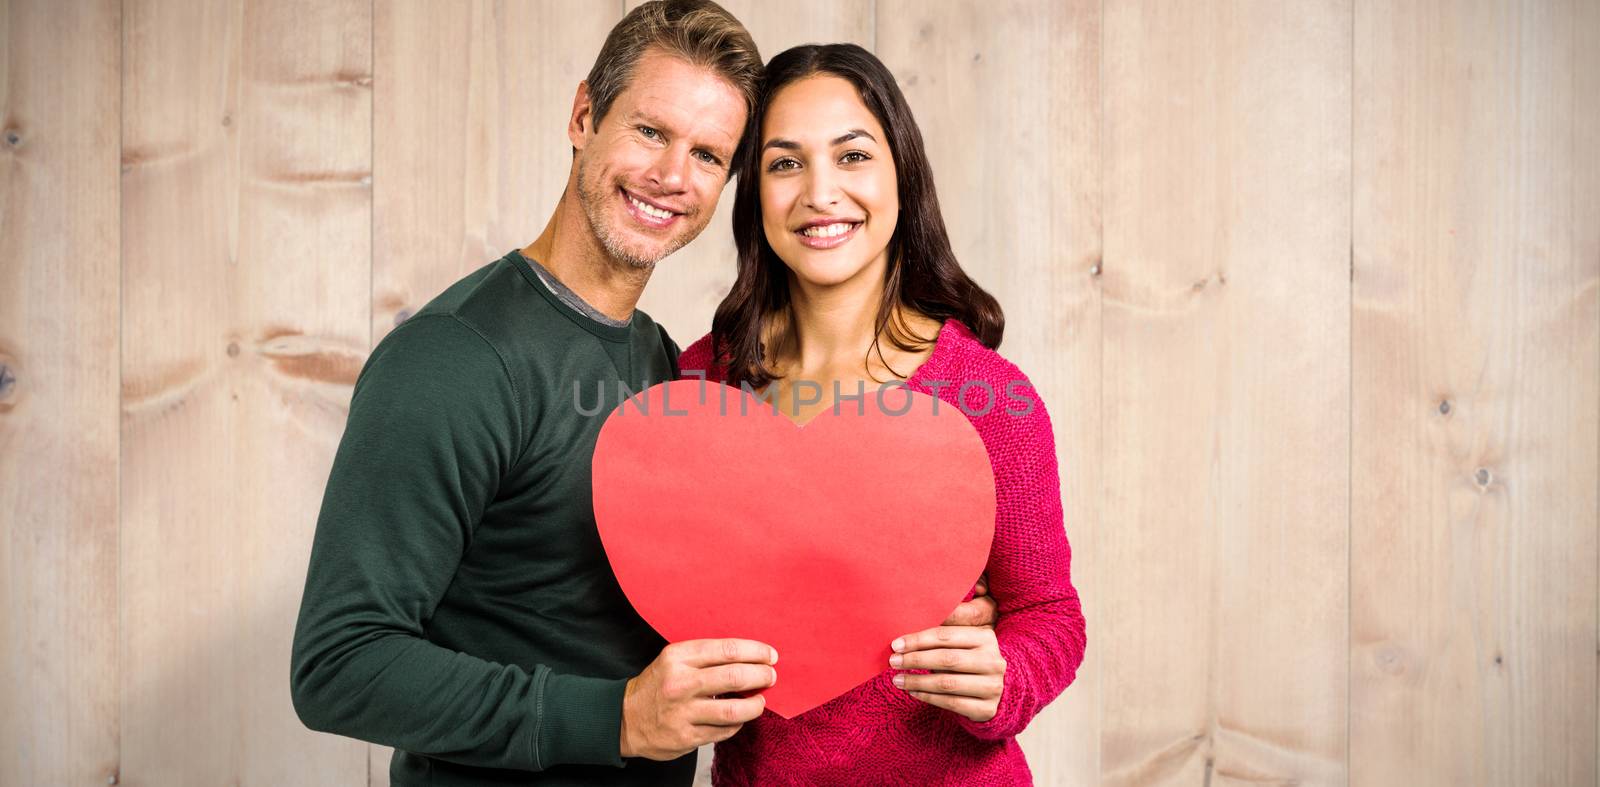 Composite image of portrait of smiling couple holding heart shape by Wavebreakmedia